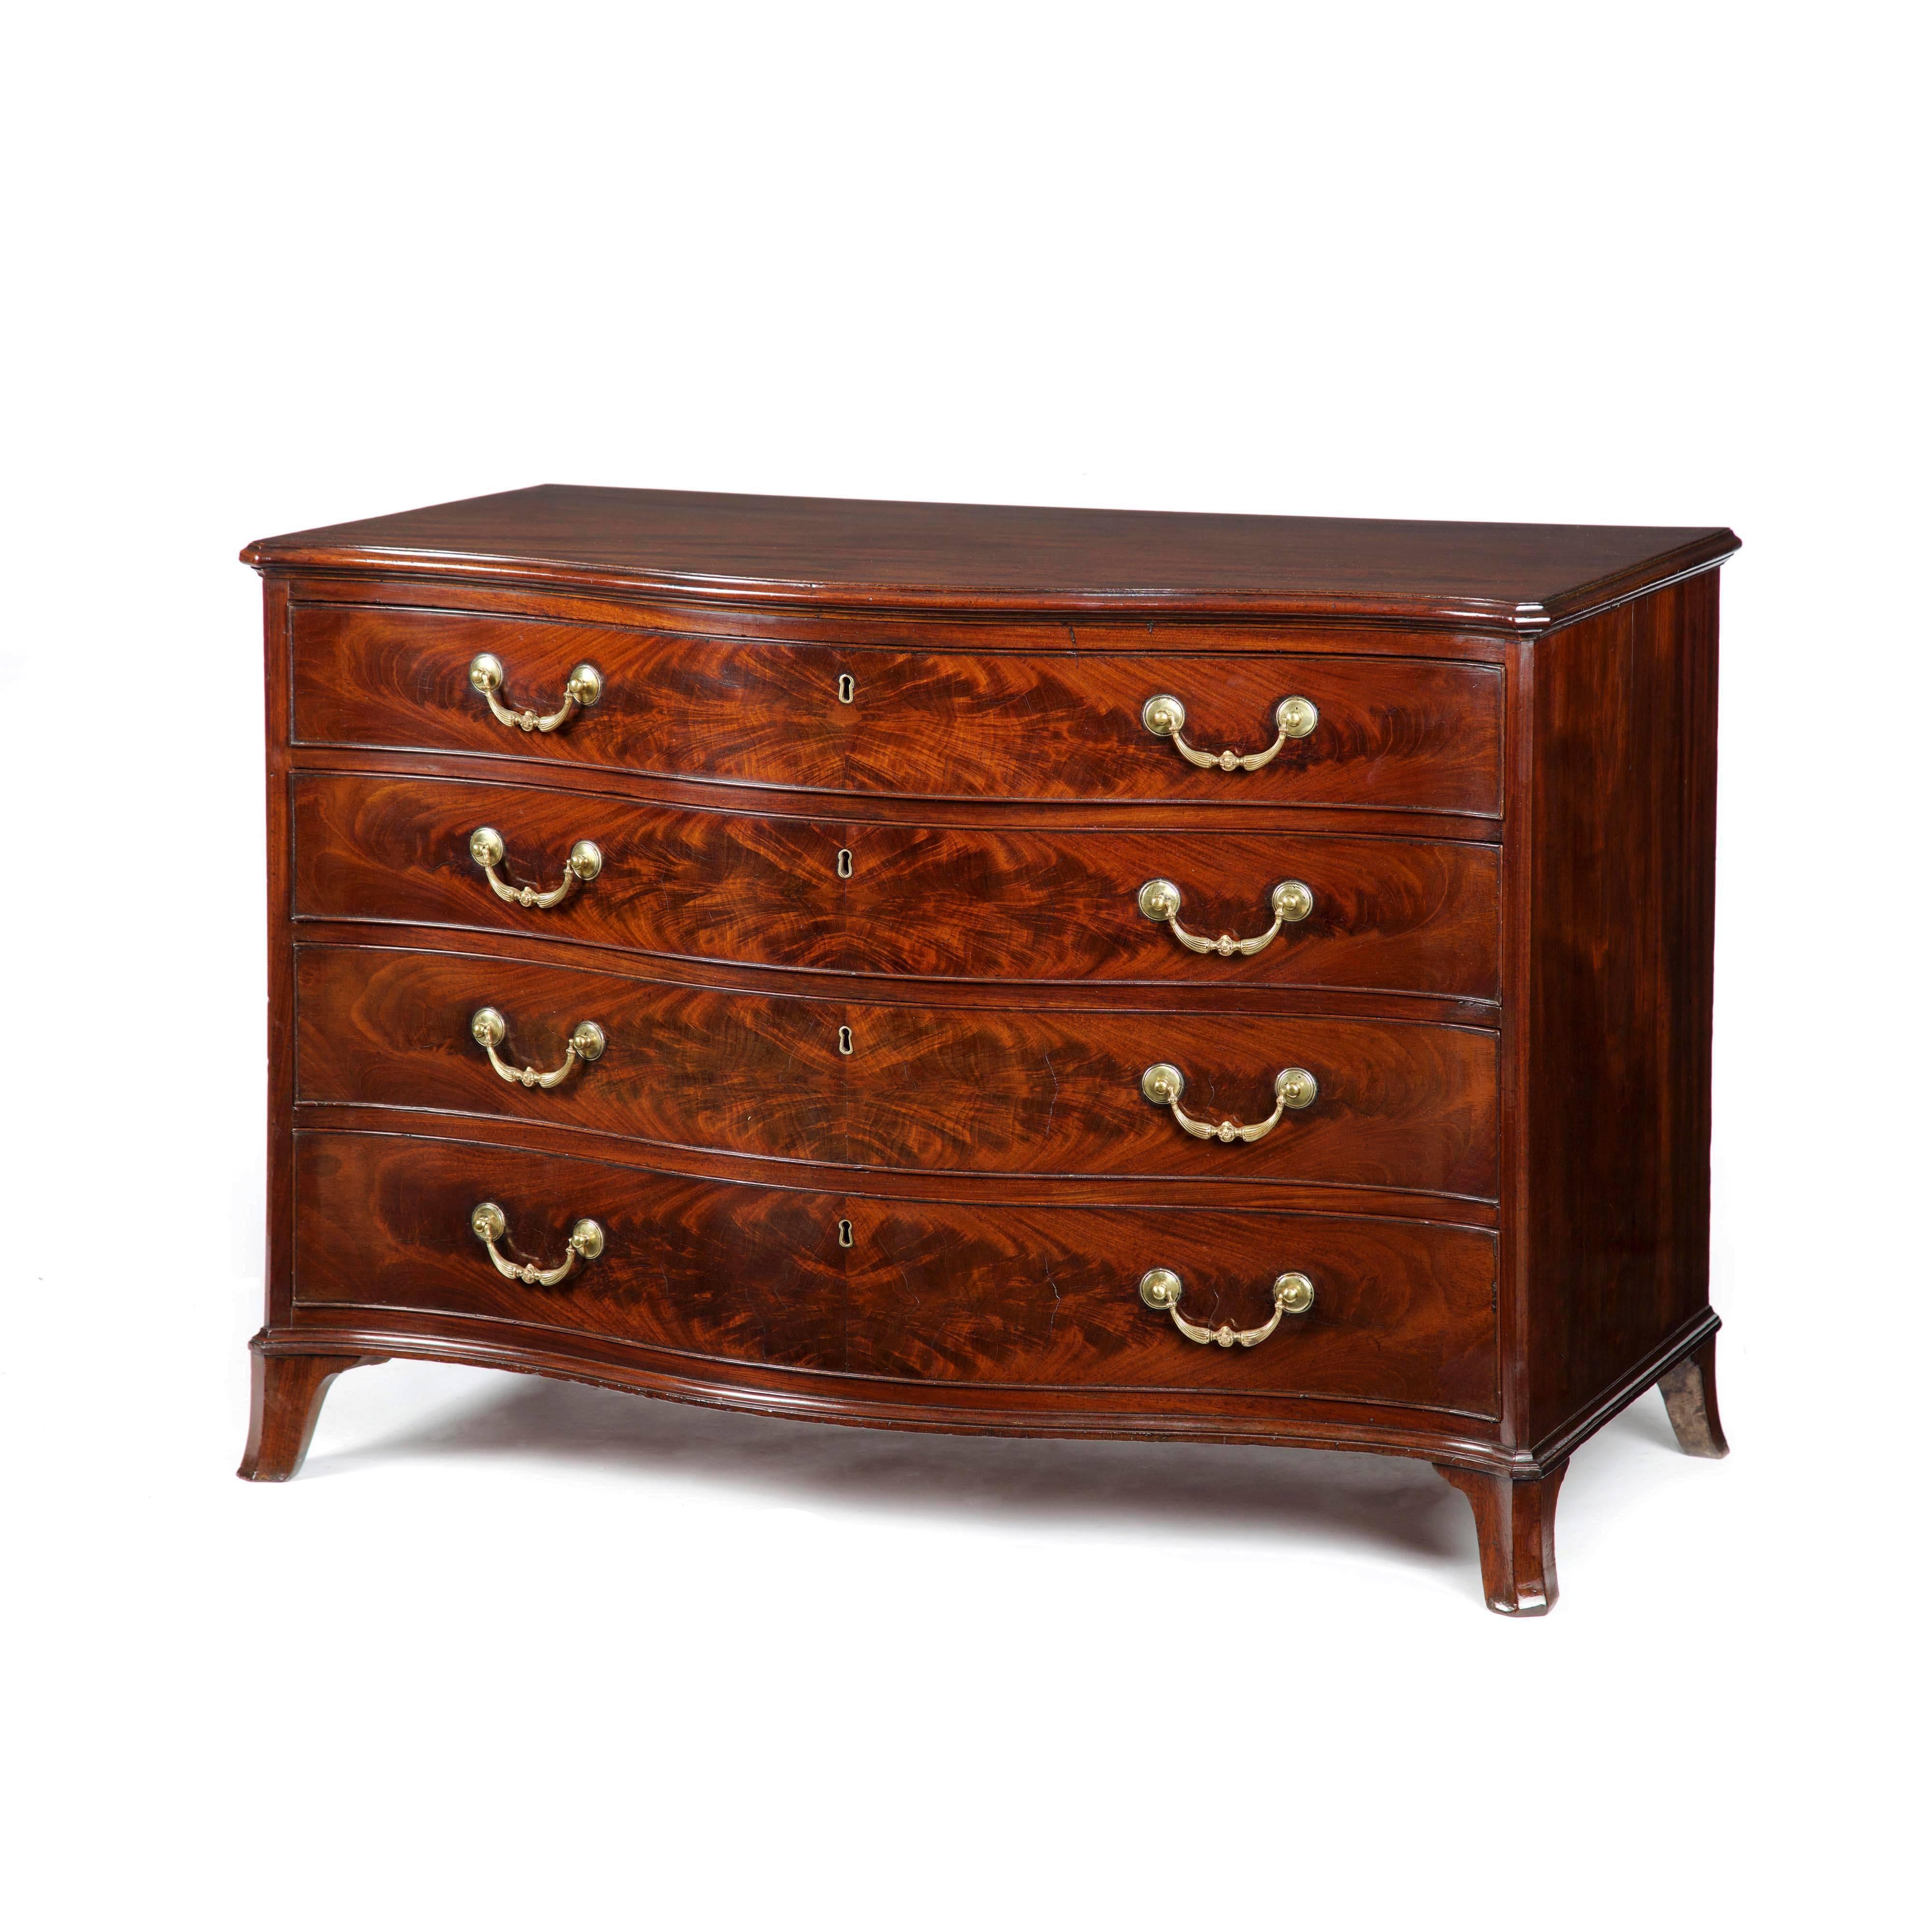 A fine George III figured mahogany serpentine commode of wonderful proportions and of excellent original color and patina, attributed to Gillows of Lancaster. The serpentine top with canted front corners and a moulded edge to three sides. Below four